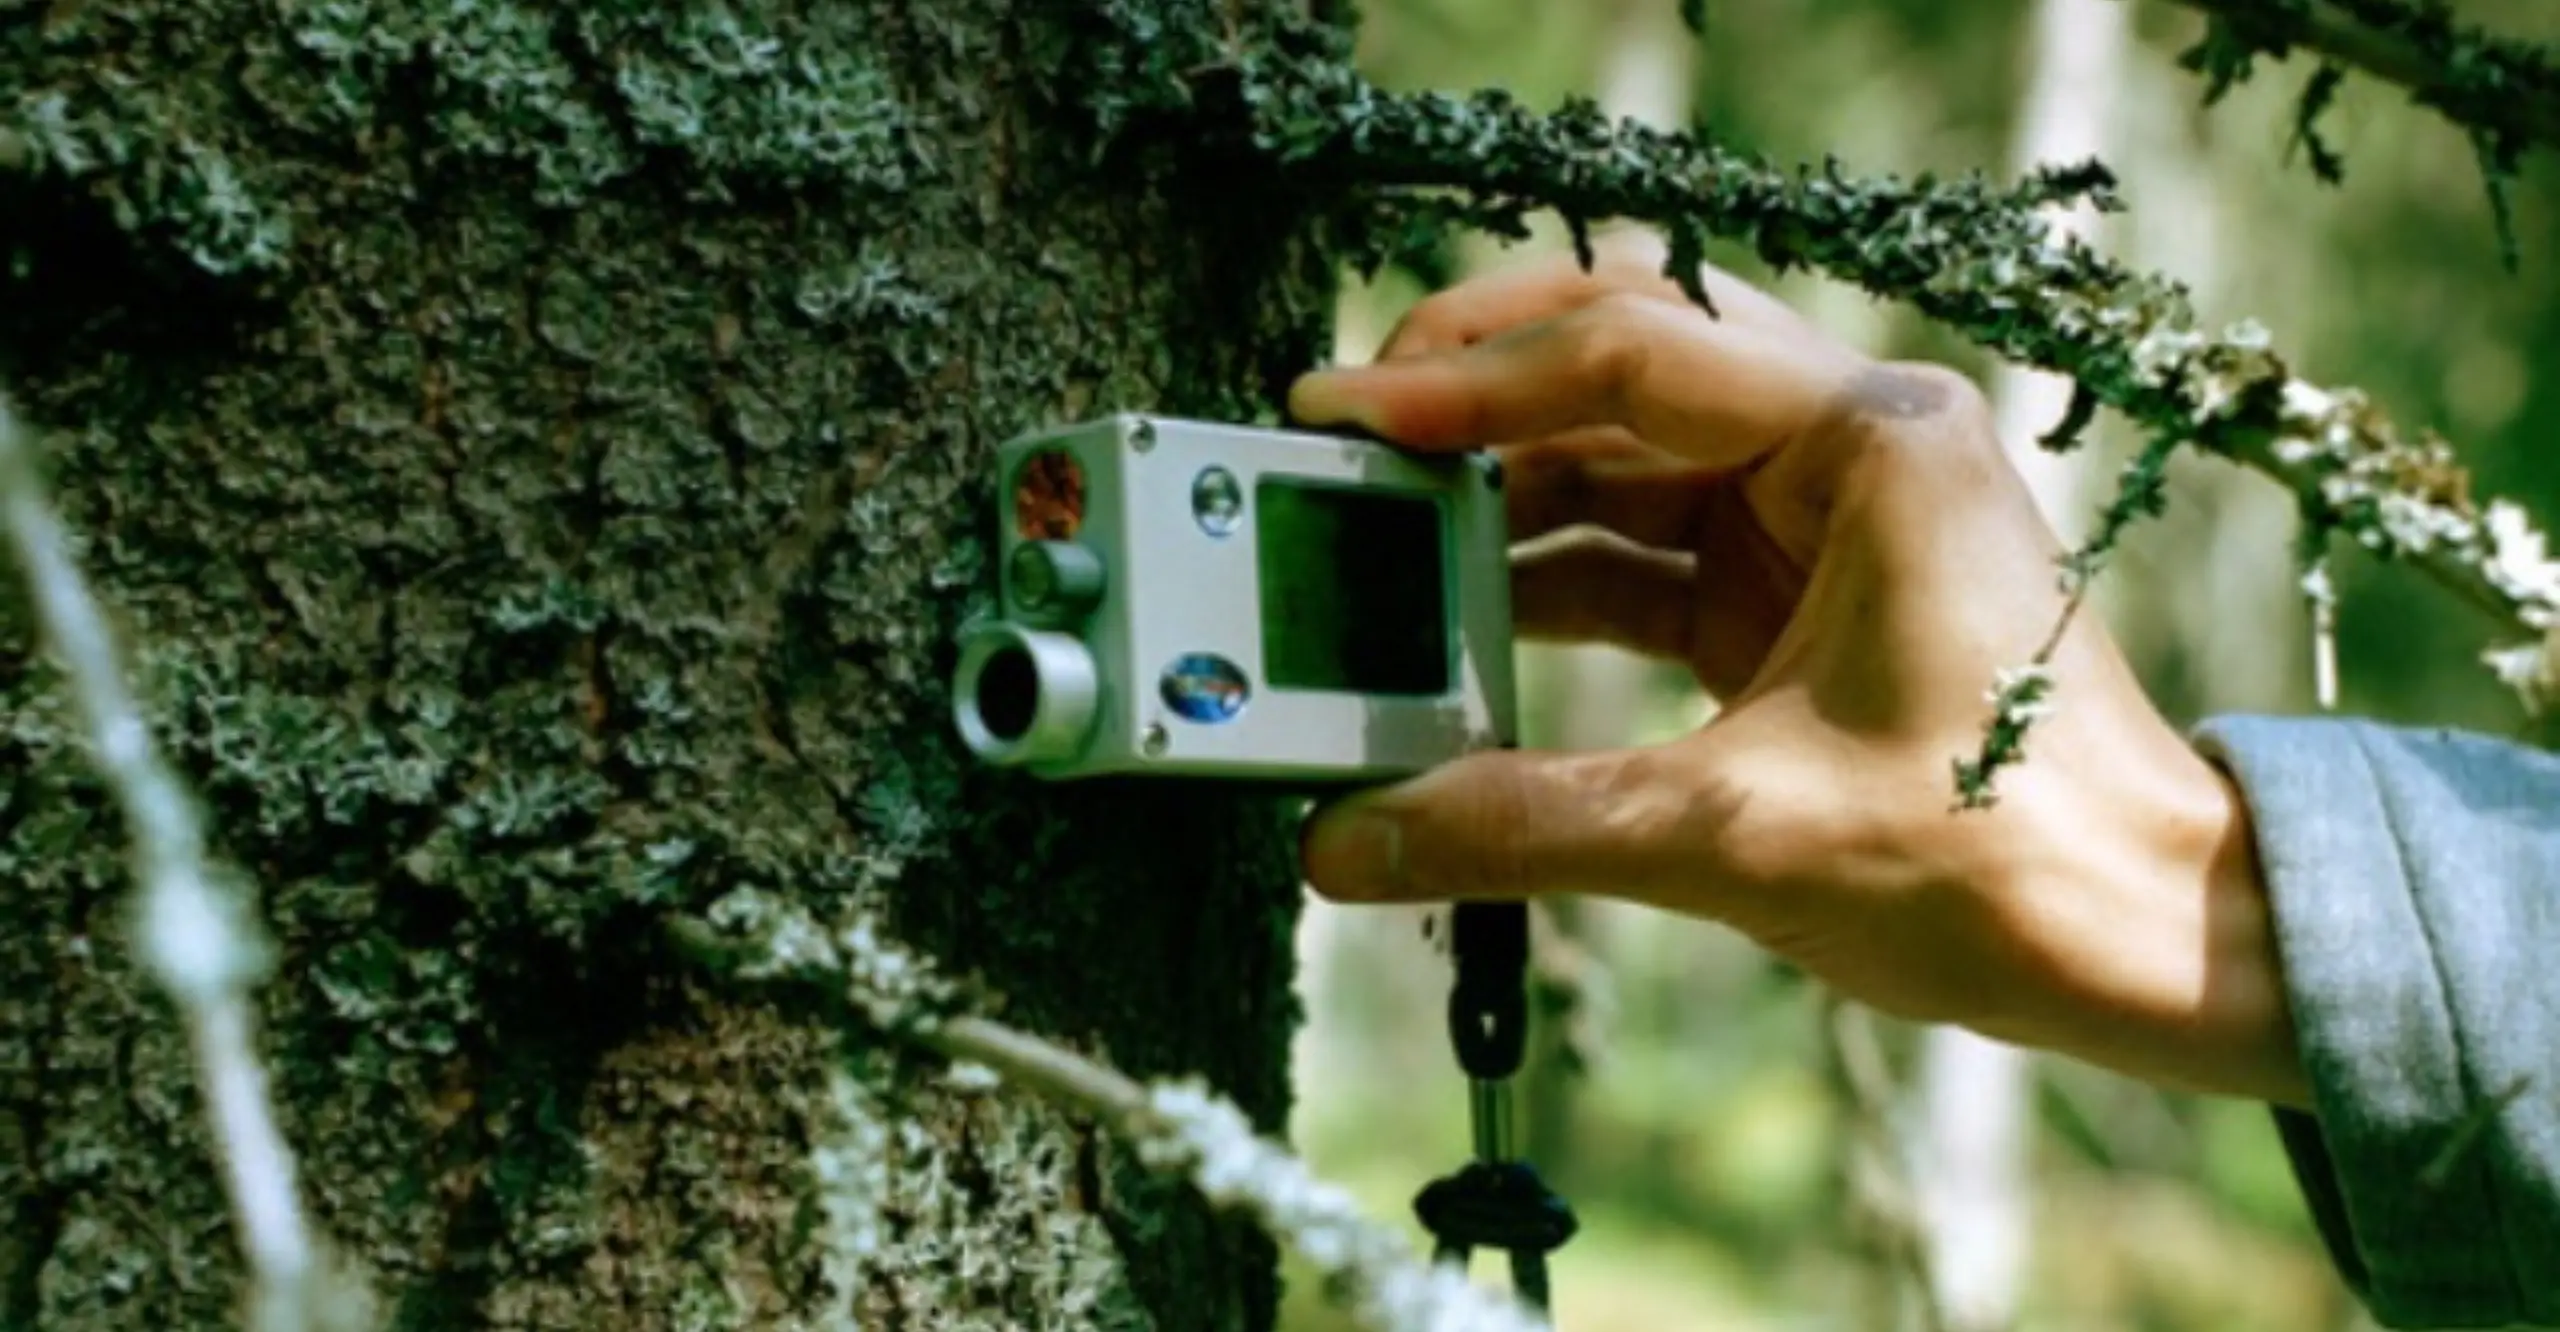 A hand holding an electronic device against a tree on a forest